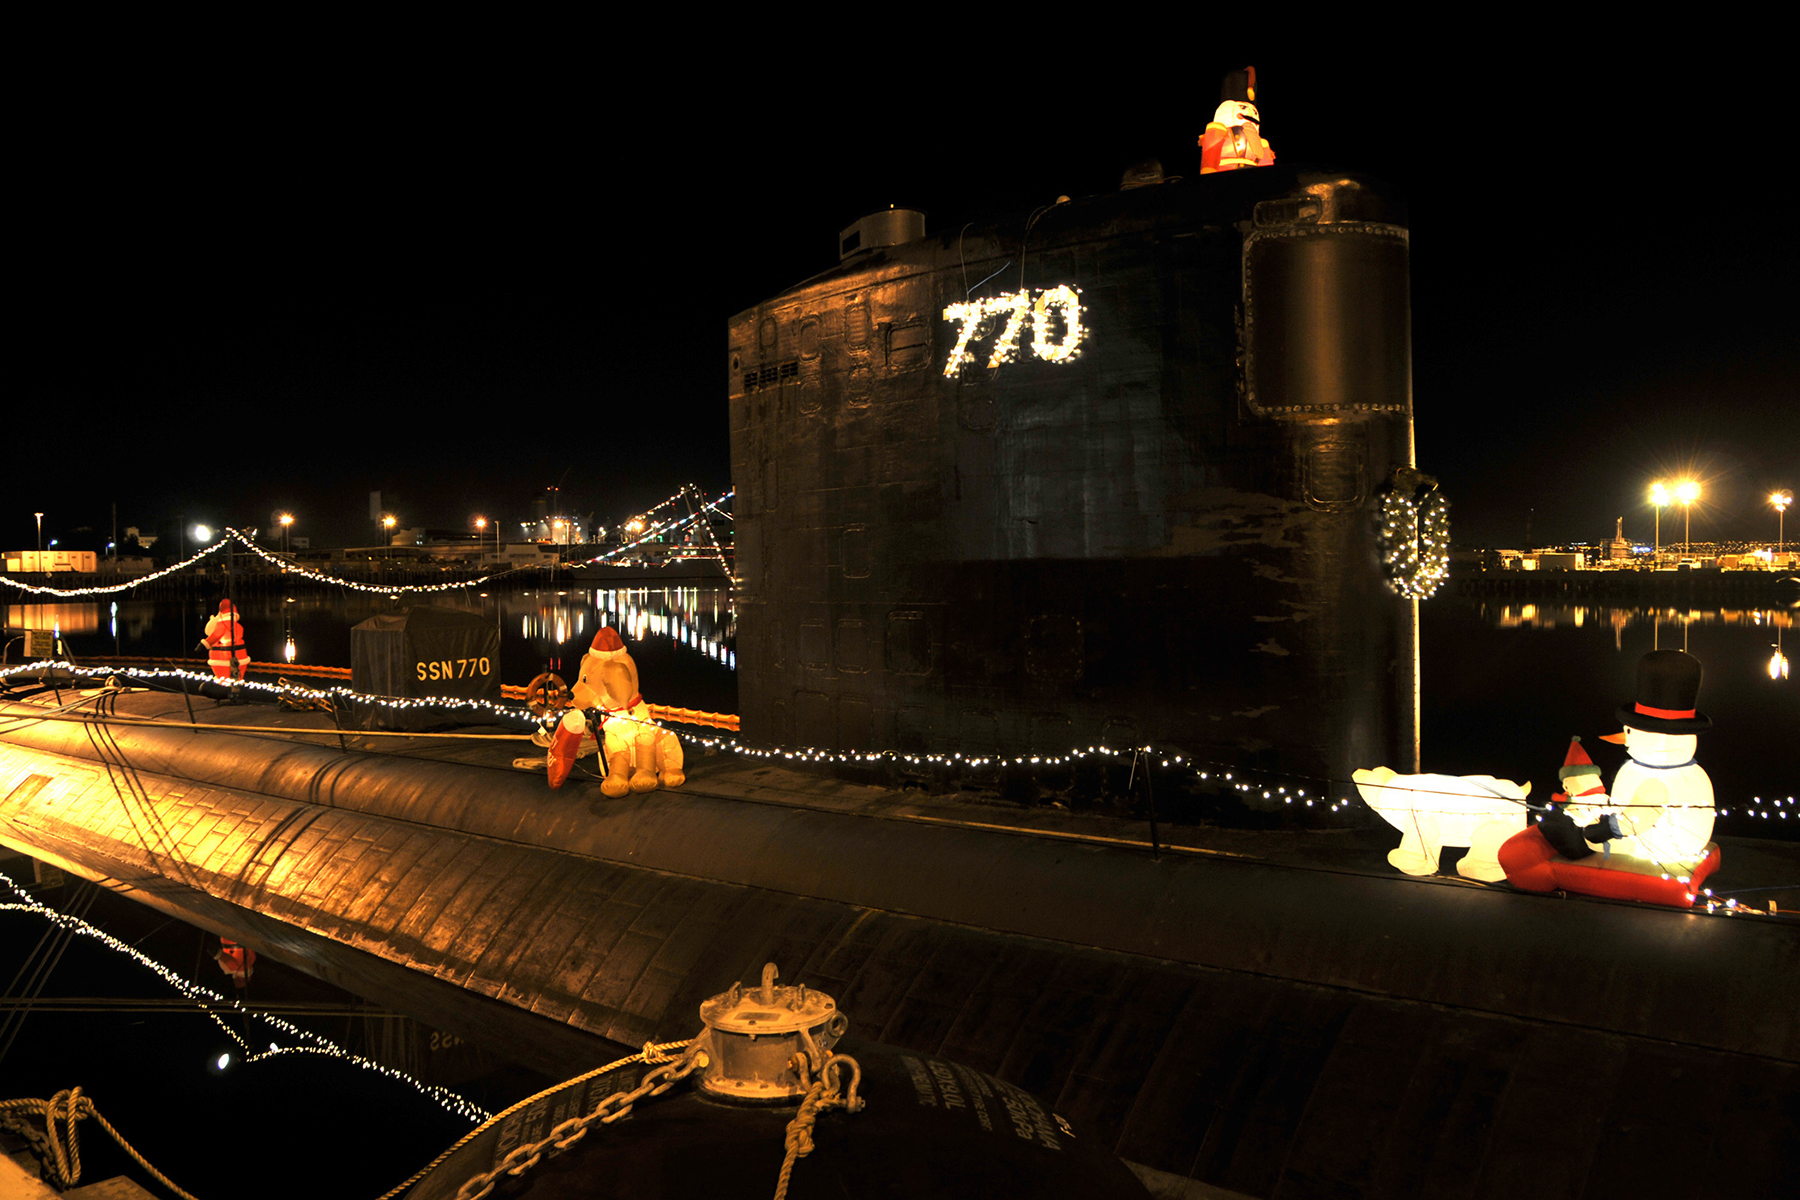 A U.S. Navy submarine is decorated with holiday lights